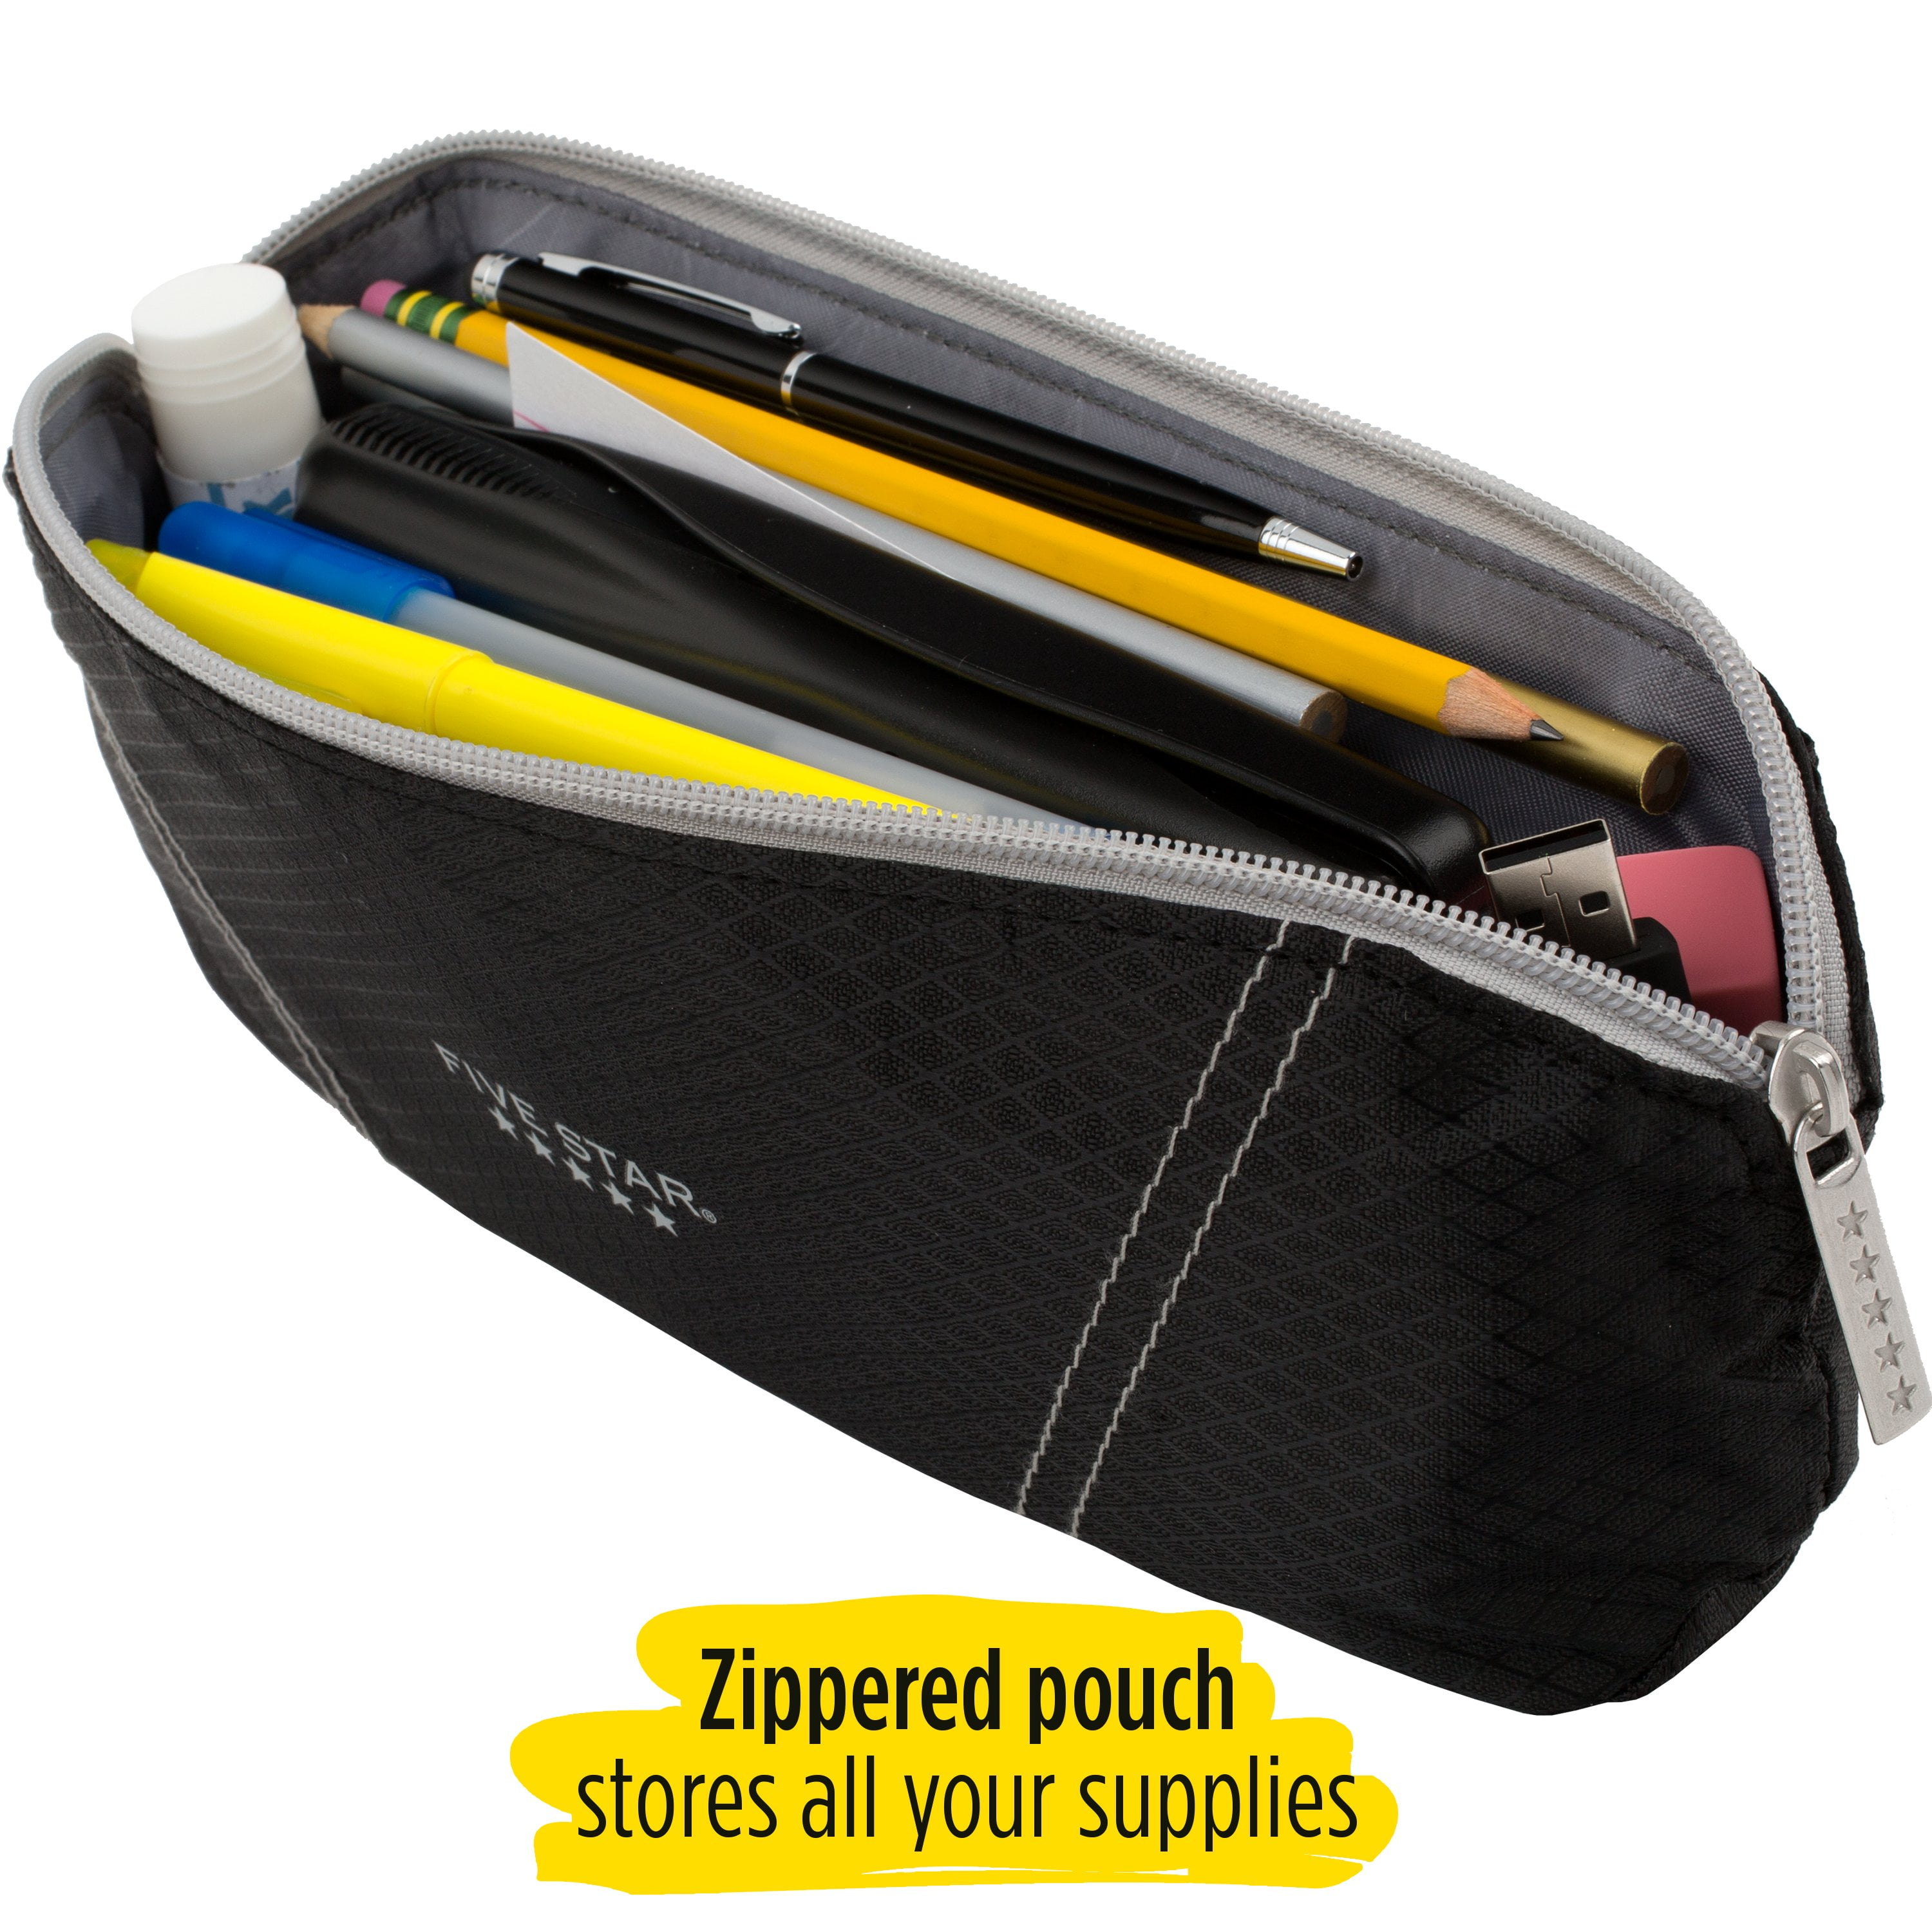 Five Star 2-In-1 Pencil Pouch, Assorted Colors